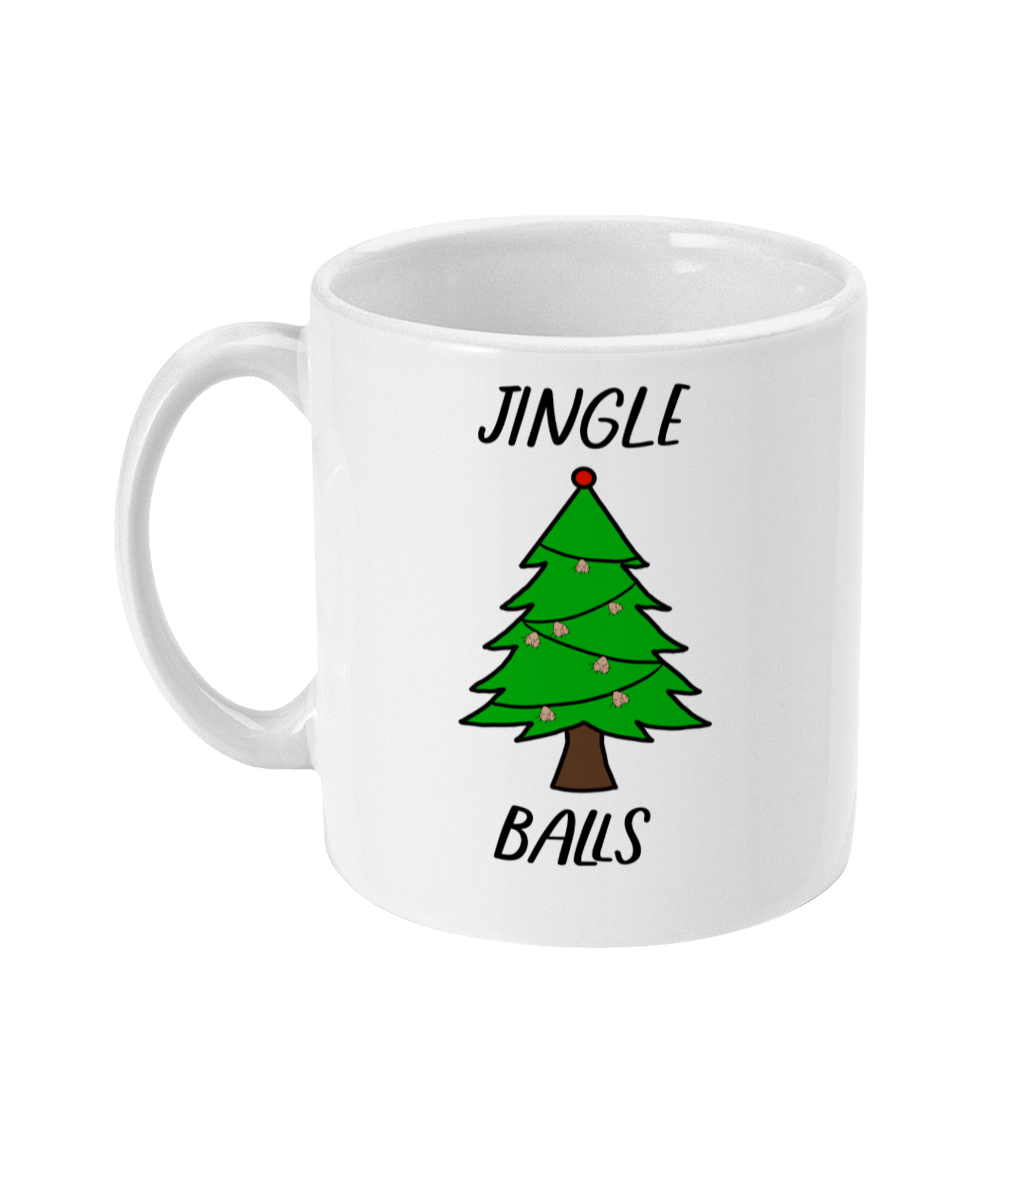 A glossy white 11oz mug with a cartoon drawn green Christmas tree with string ball sack lights circling the tree. The word Jingle is printed above the tree in black font and the word Balls is printed below the tree in black font. The mug is in front of a simple white background. 